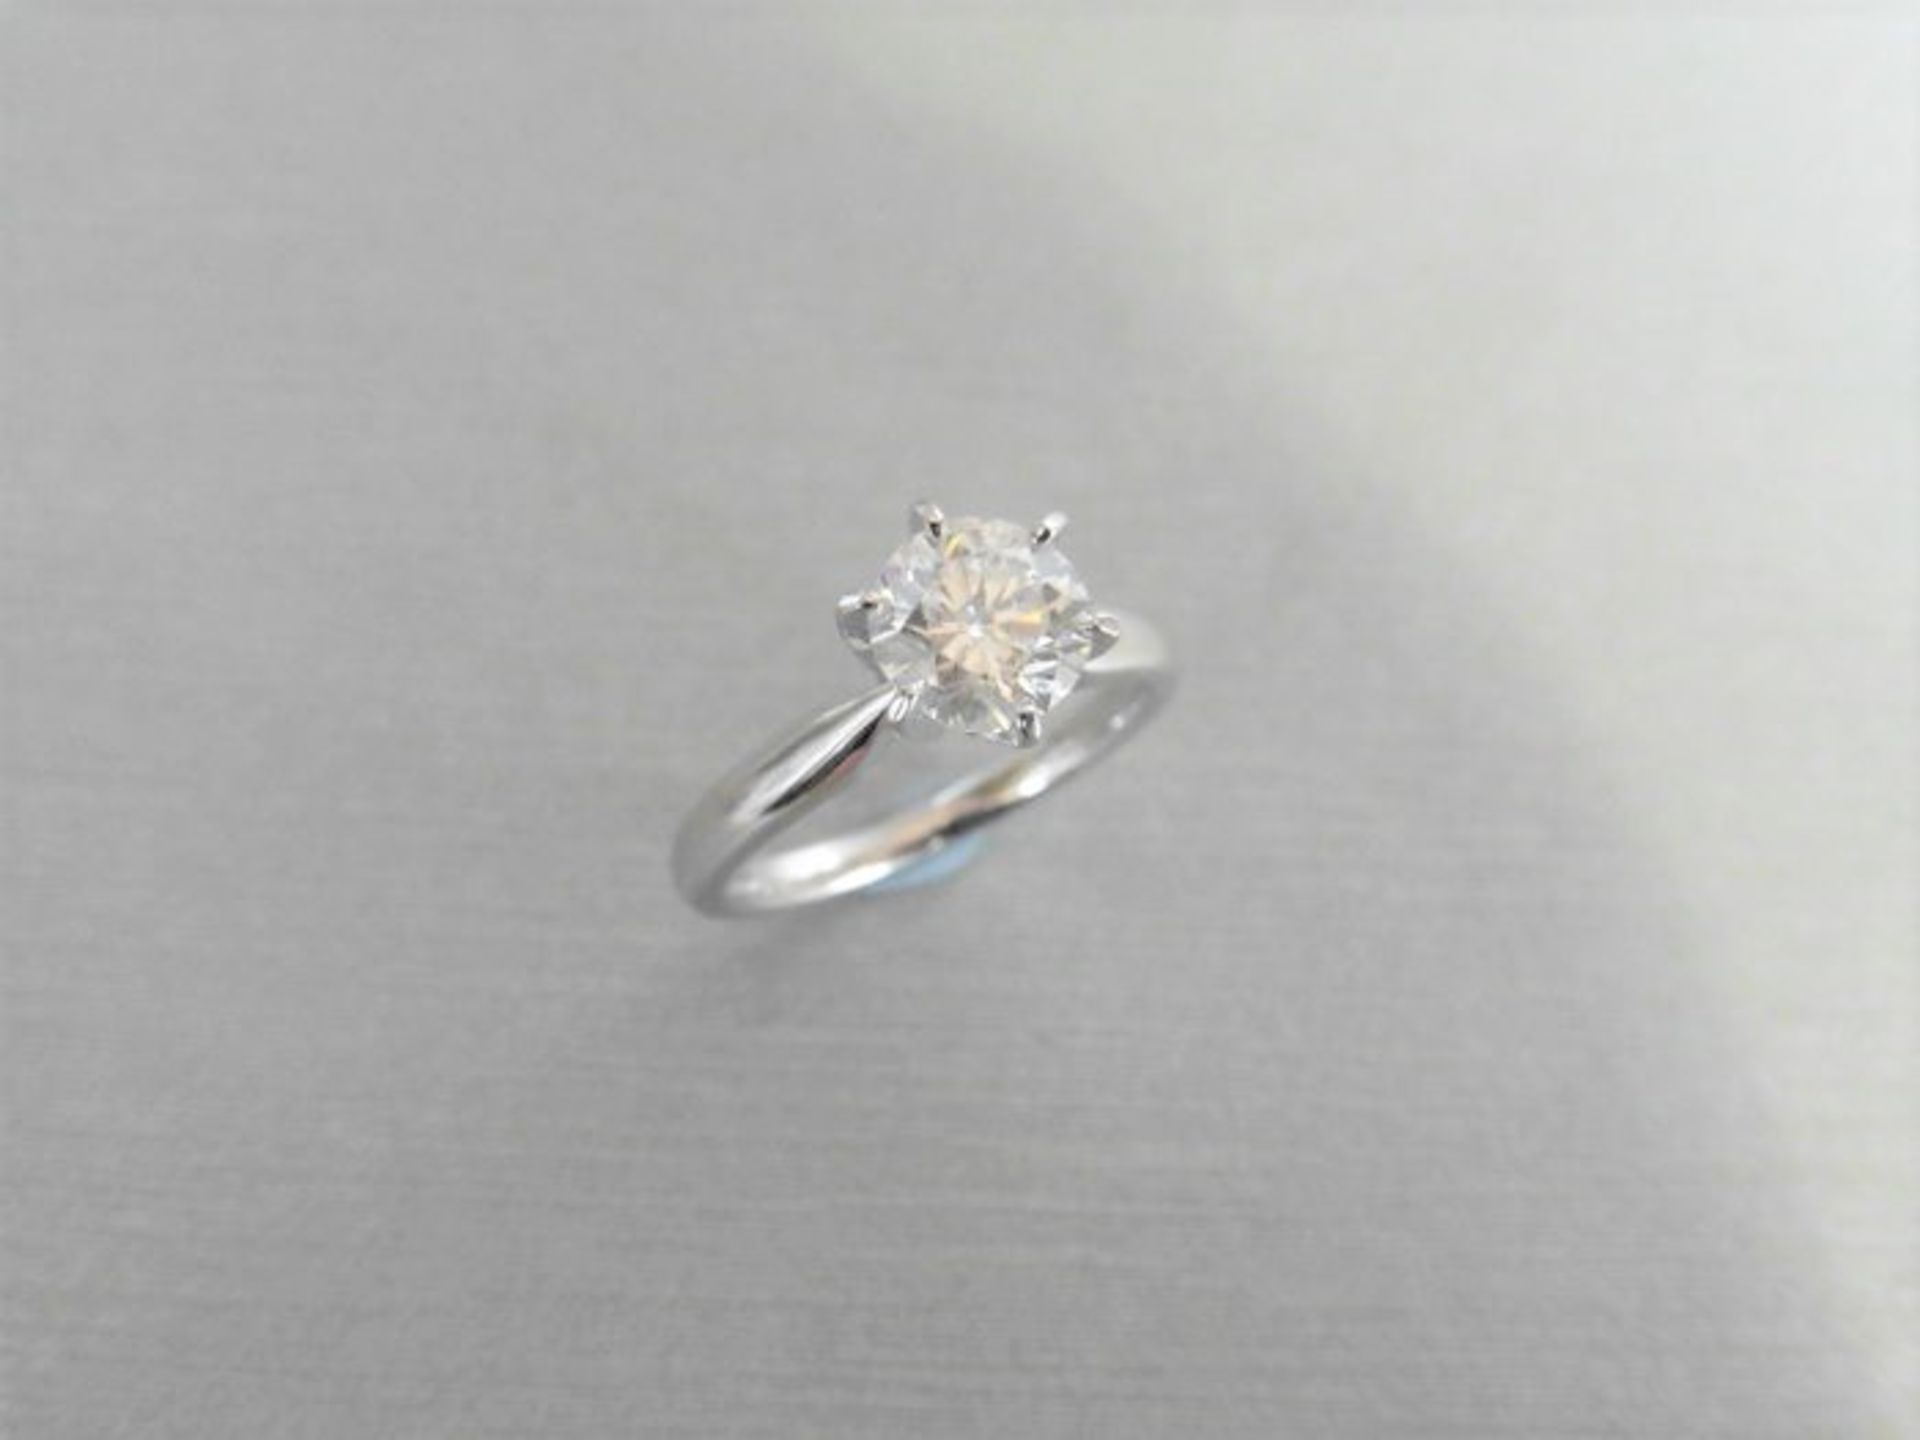 1.01ct diamond solitaire ring set in 18ct white gold. J colour and I1-2 clarity. 6 claw setting,